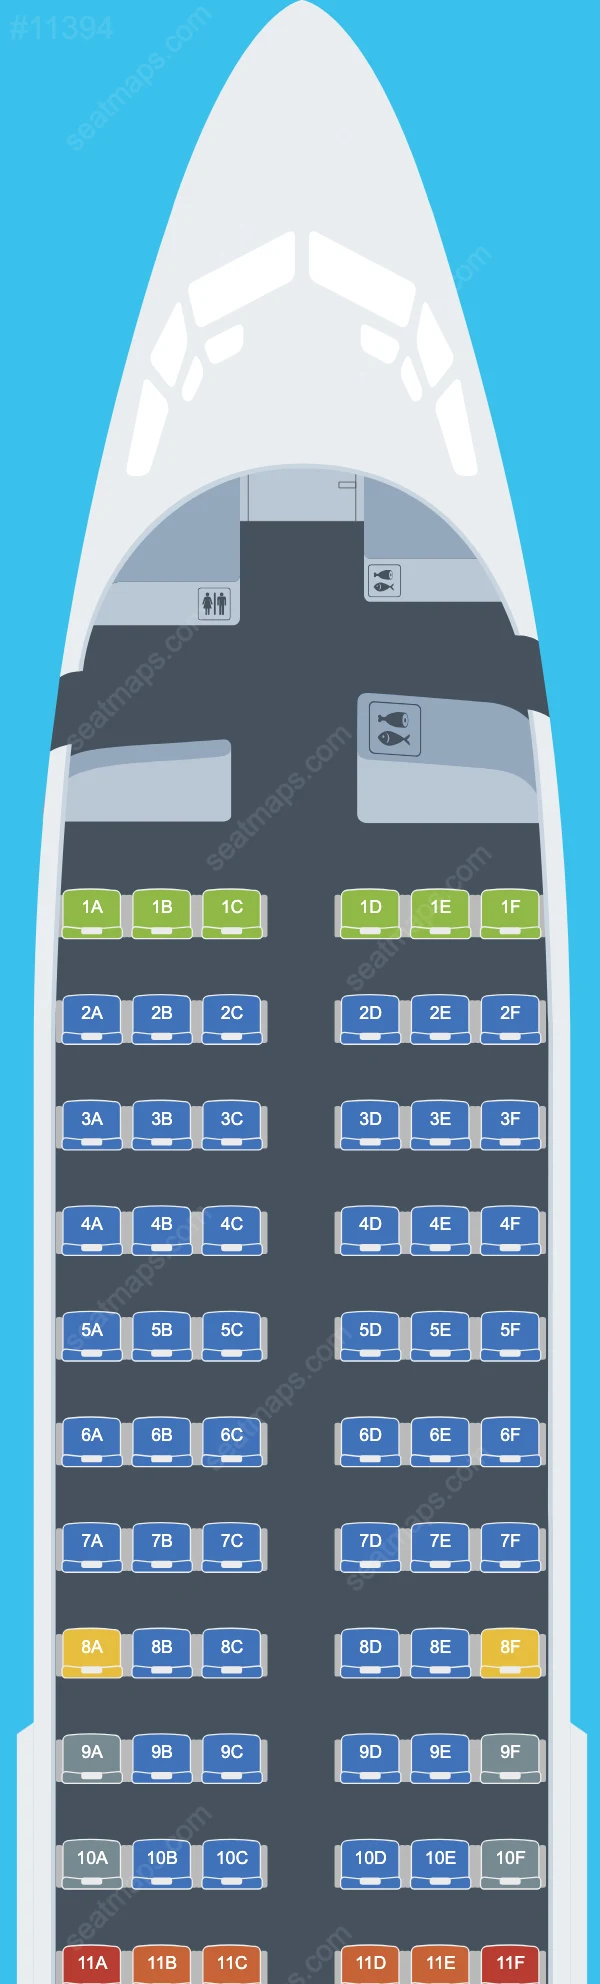 Hello Jets Boeing 737 aircraft seat map  737-700